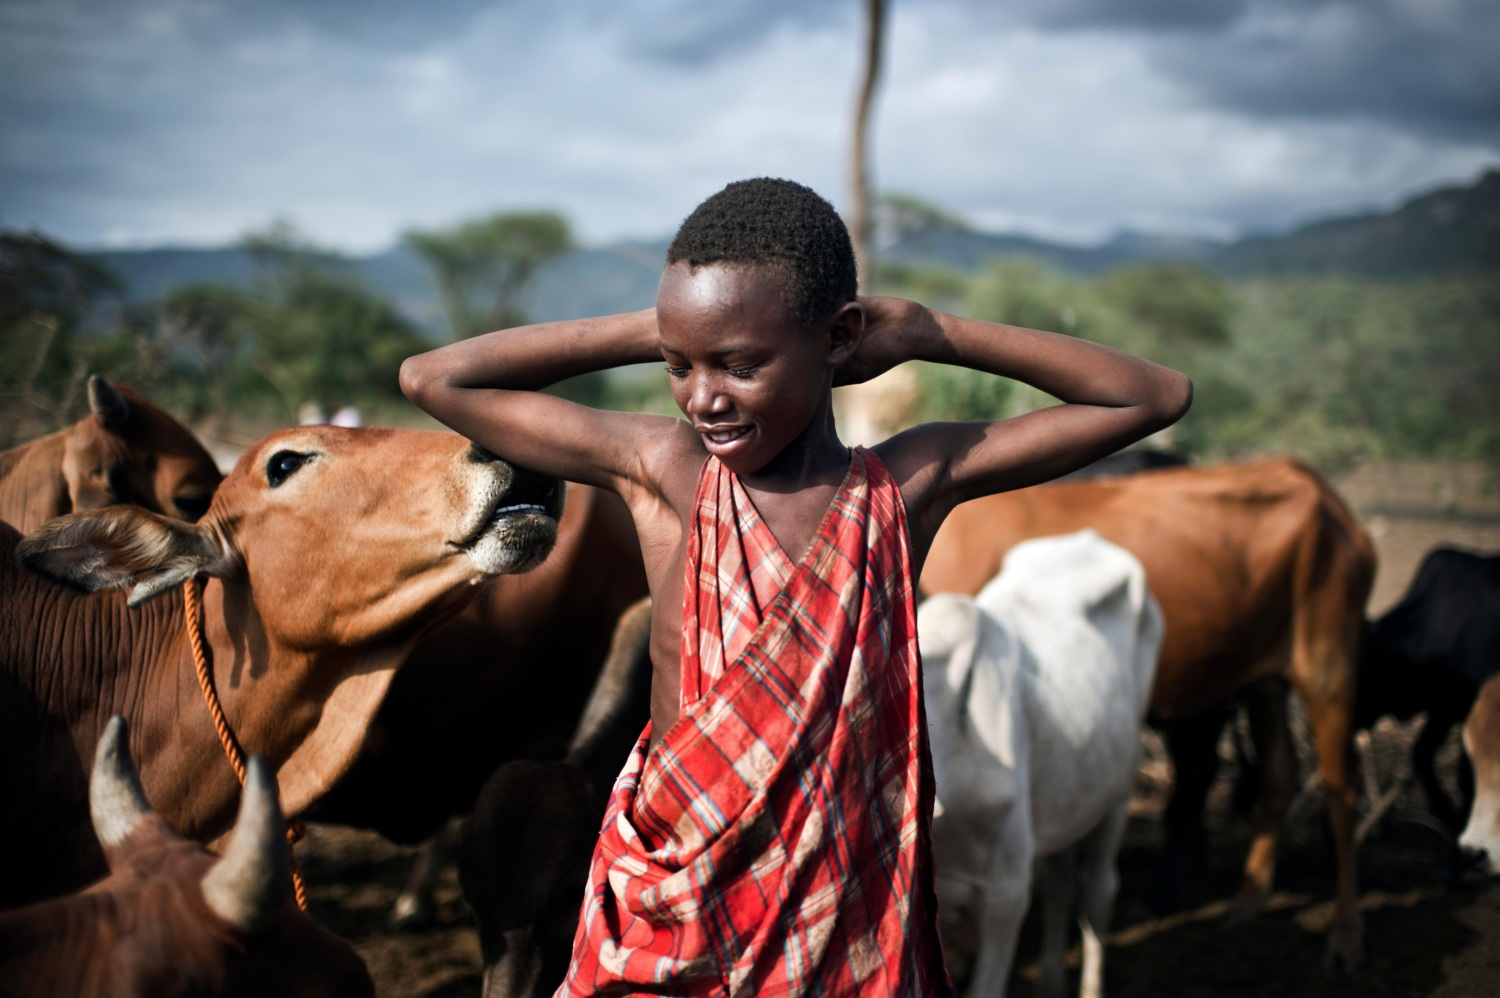 Nine year old Albert Mkatia smiles and looks down while standing in front of cattle, with his arms up and hands behind his head.